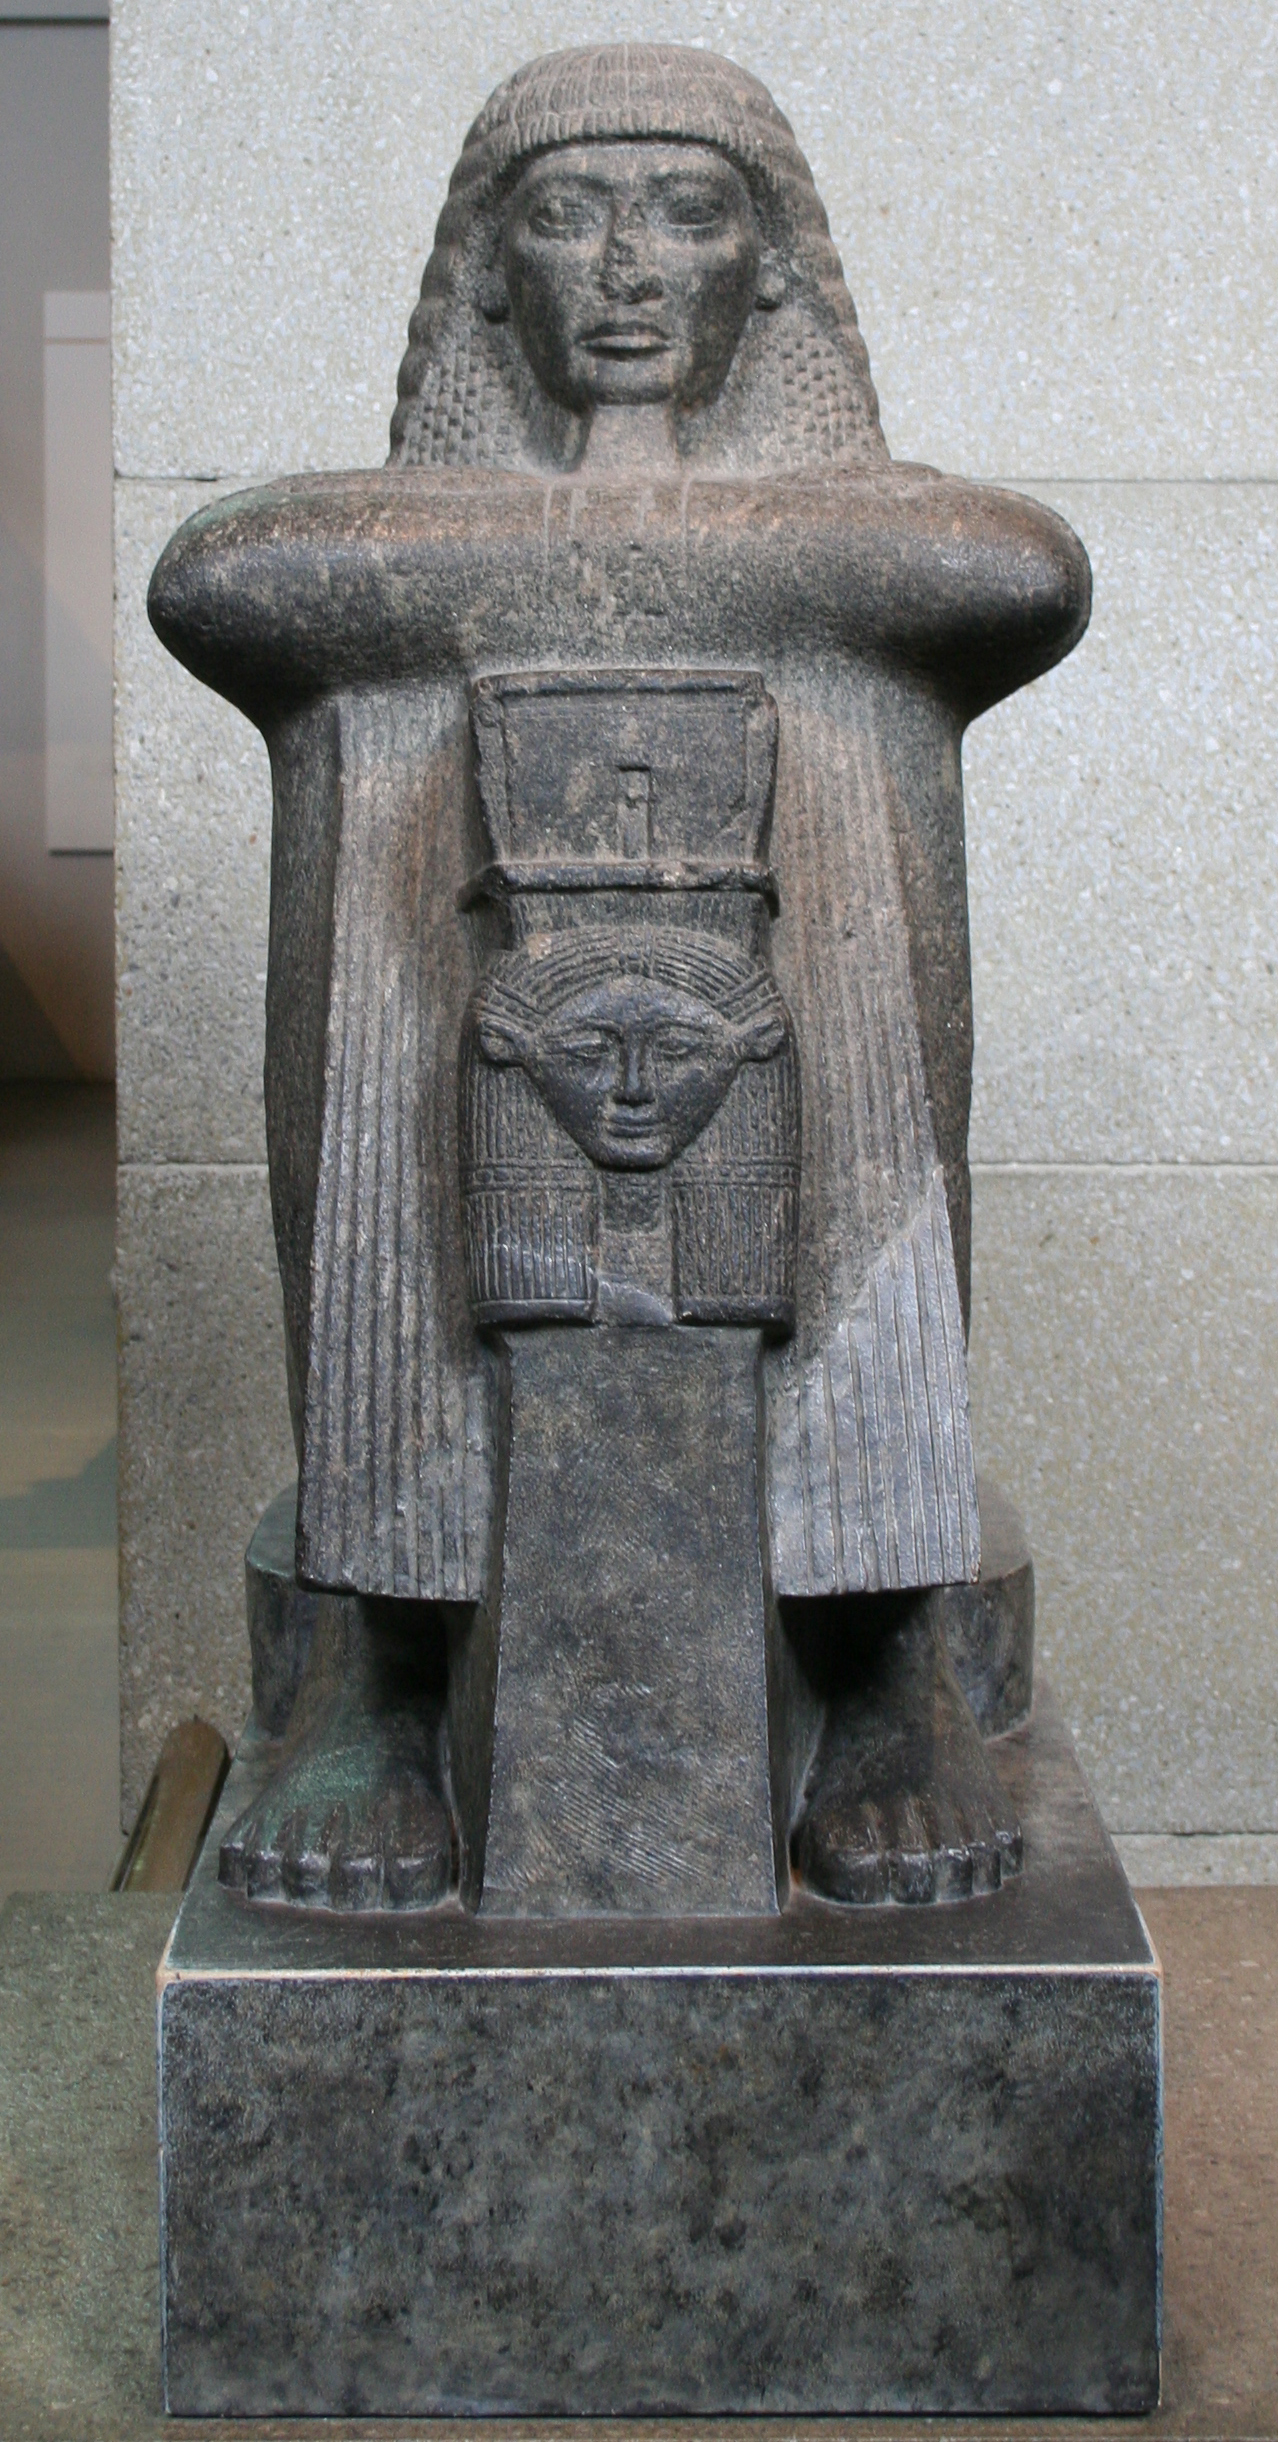 21 - Egyptian artifact with Hathor on the front, now in British Museum